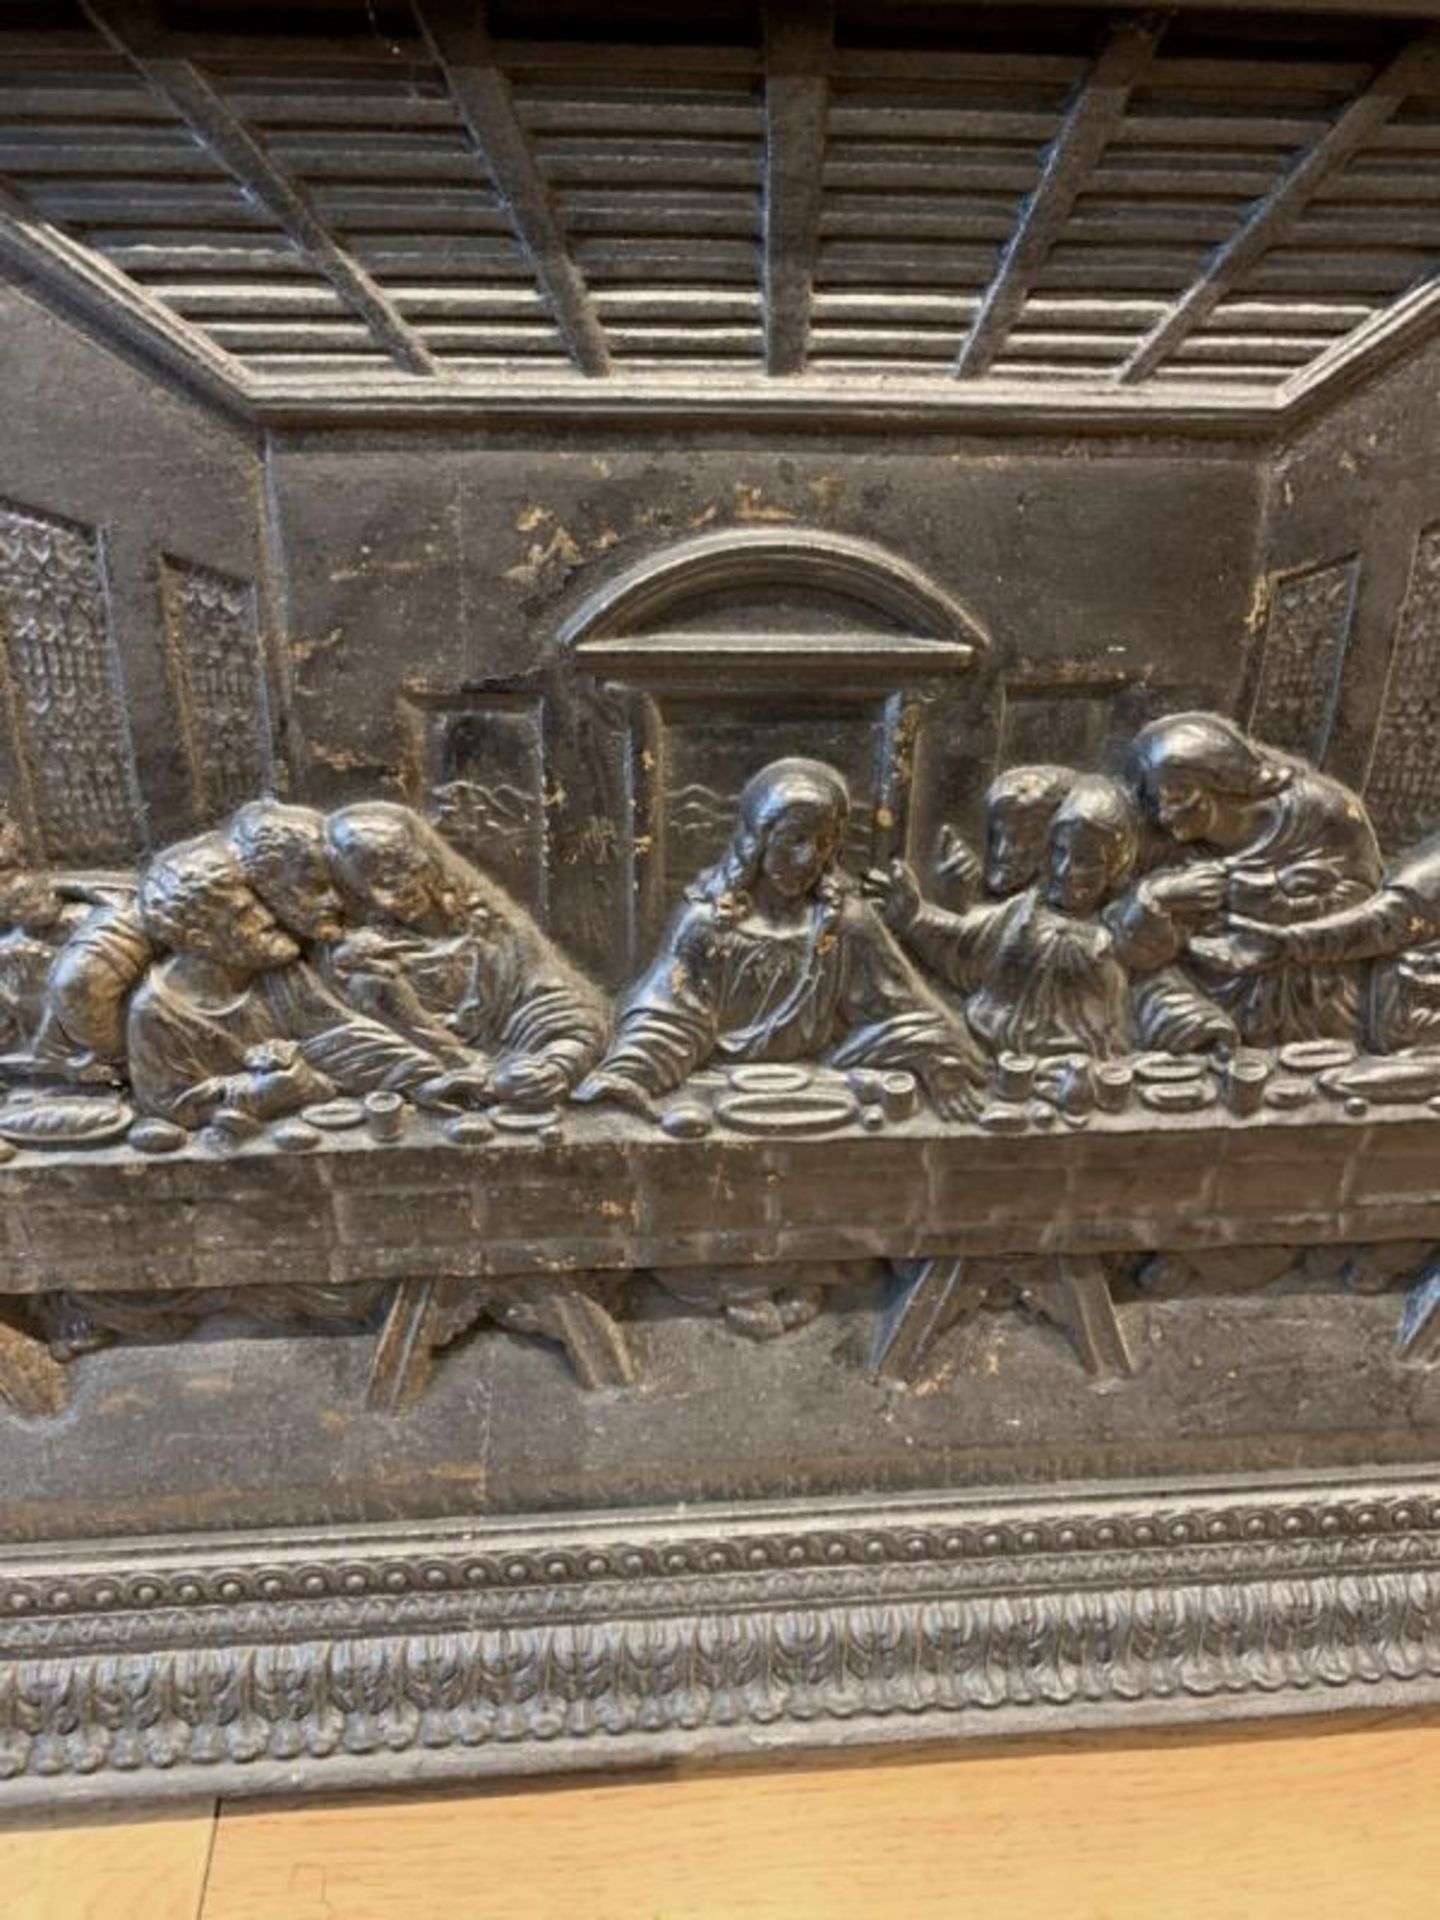 1 x Heavy Solid Cast Iron Rectangular Sculpture Featuring The Famous 'Last Supper' Scene - - Image 3 of 14